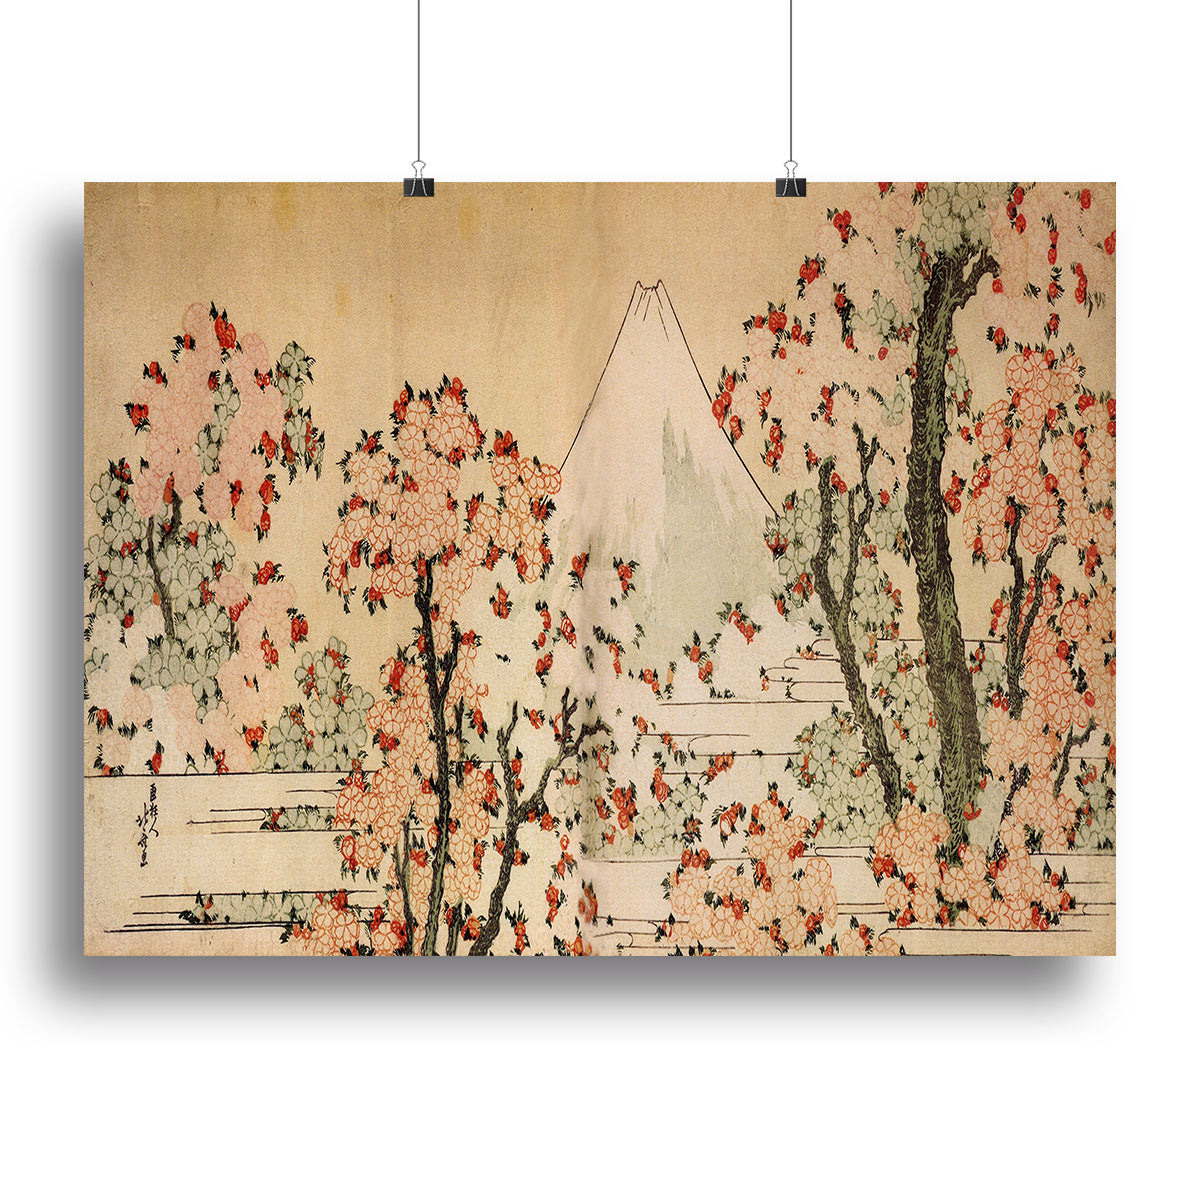 Mount Fuji behind cherry trees and flowers by Hokusai Canvas Print or Poster - Canvas Art Rocks - 2